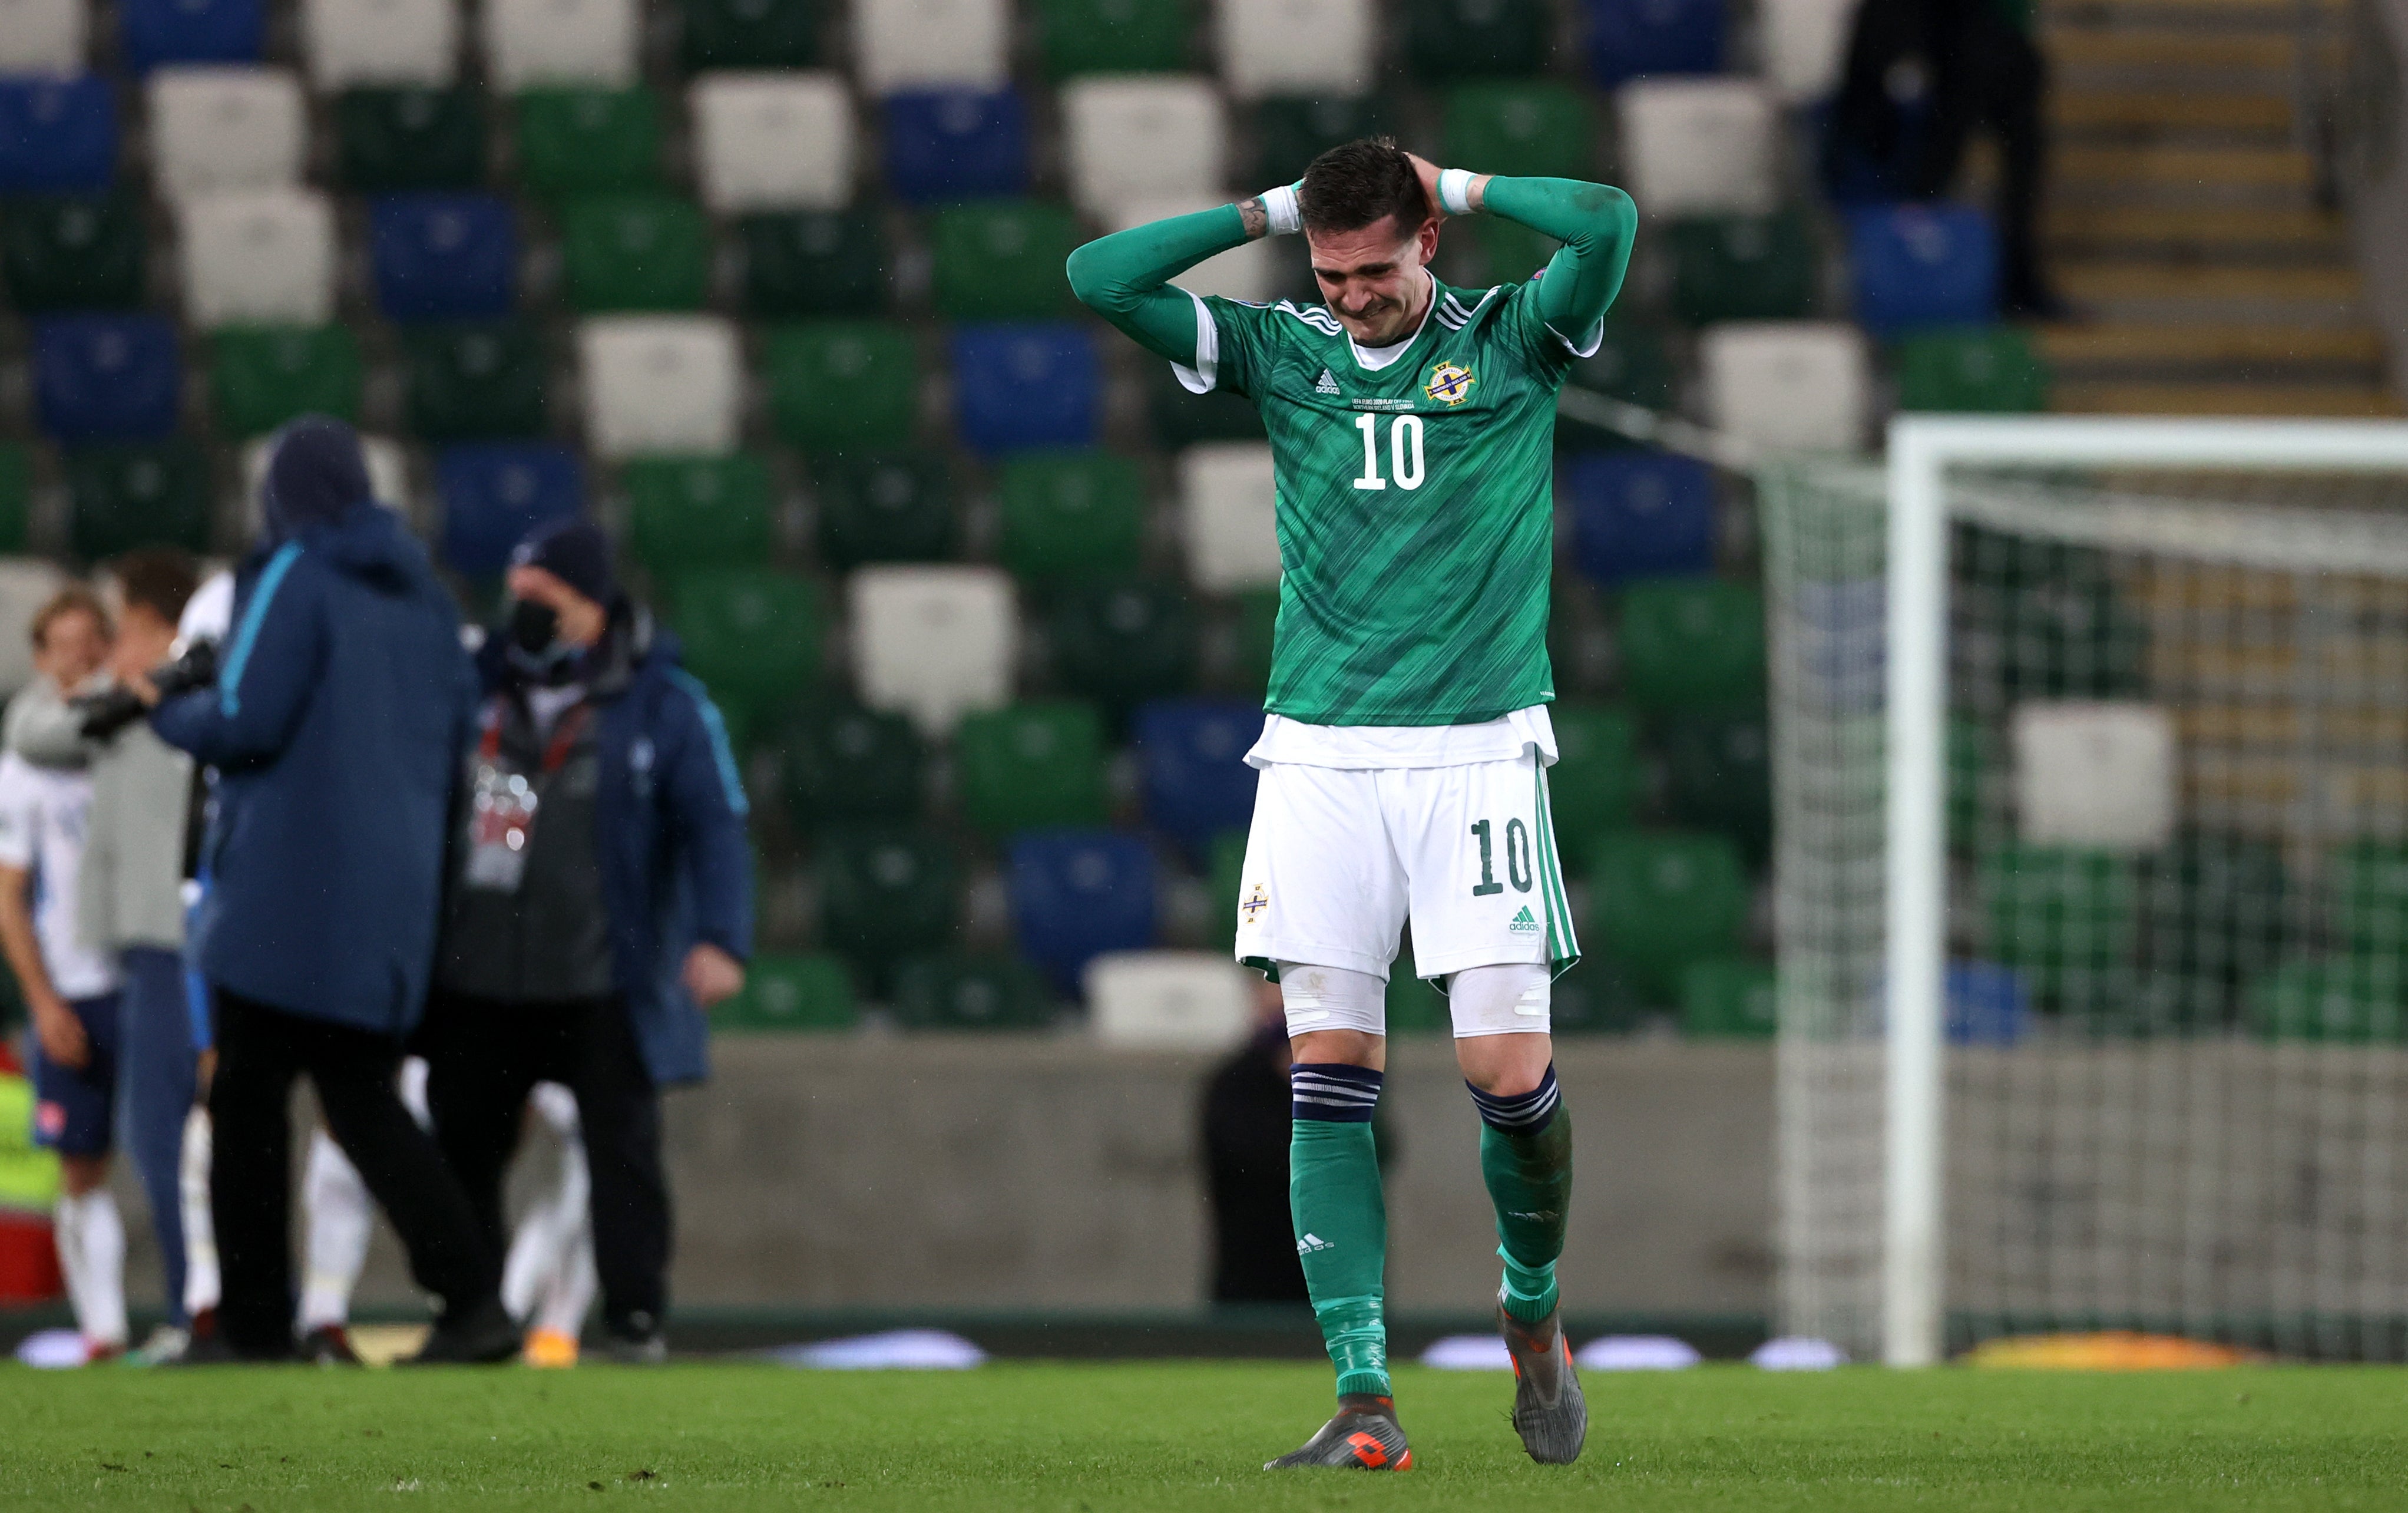 Kyle Lafferty has been withdrawn from the Northern Ireland squad (Liam McBurney/PA)